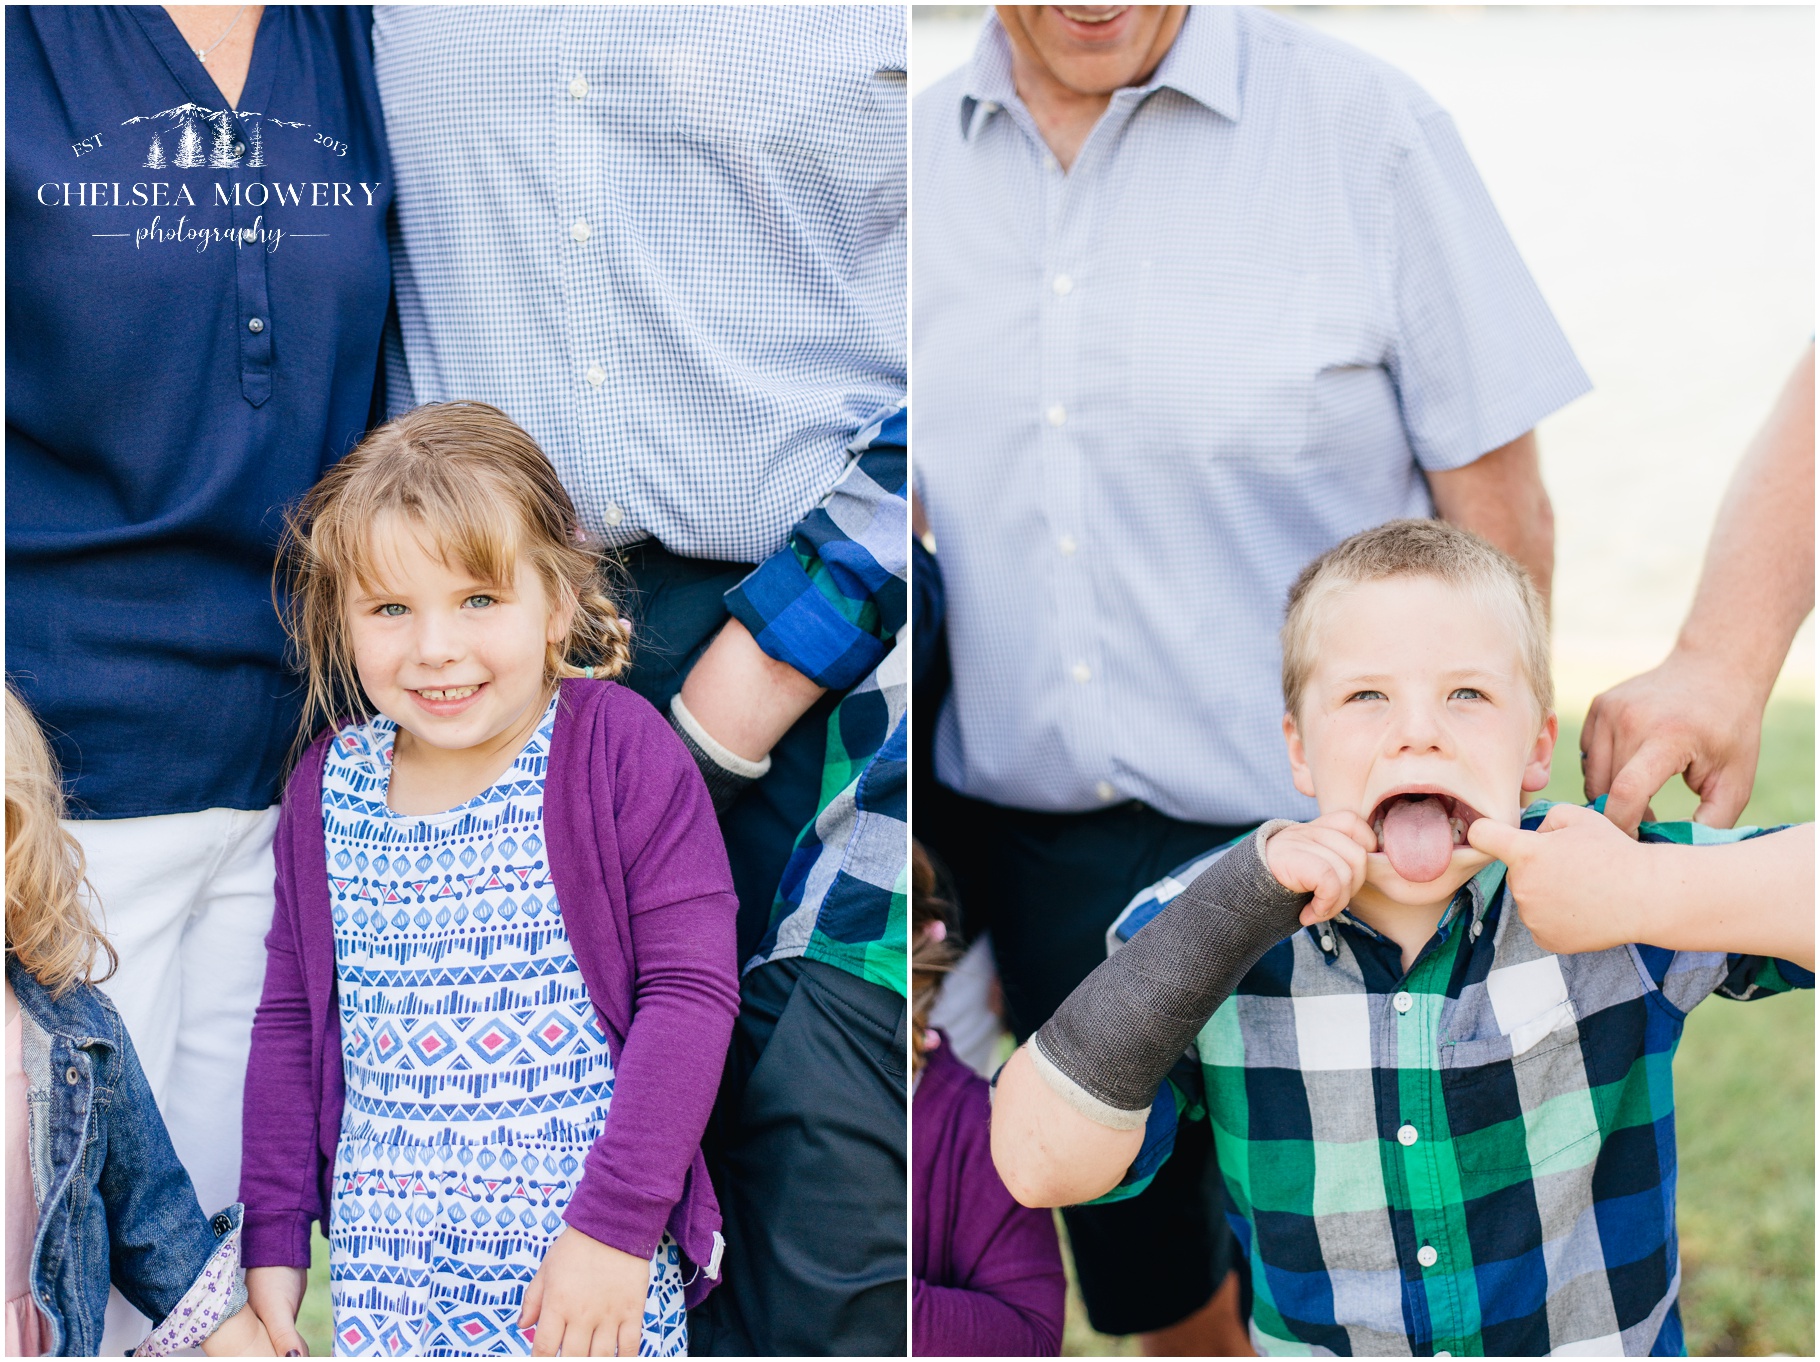 silly child photography poses | family portrait photography